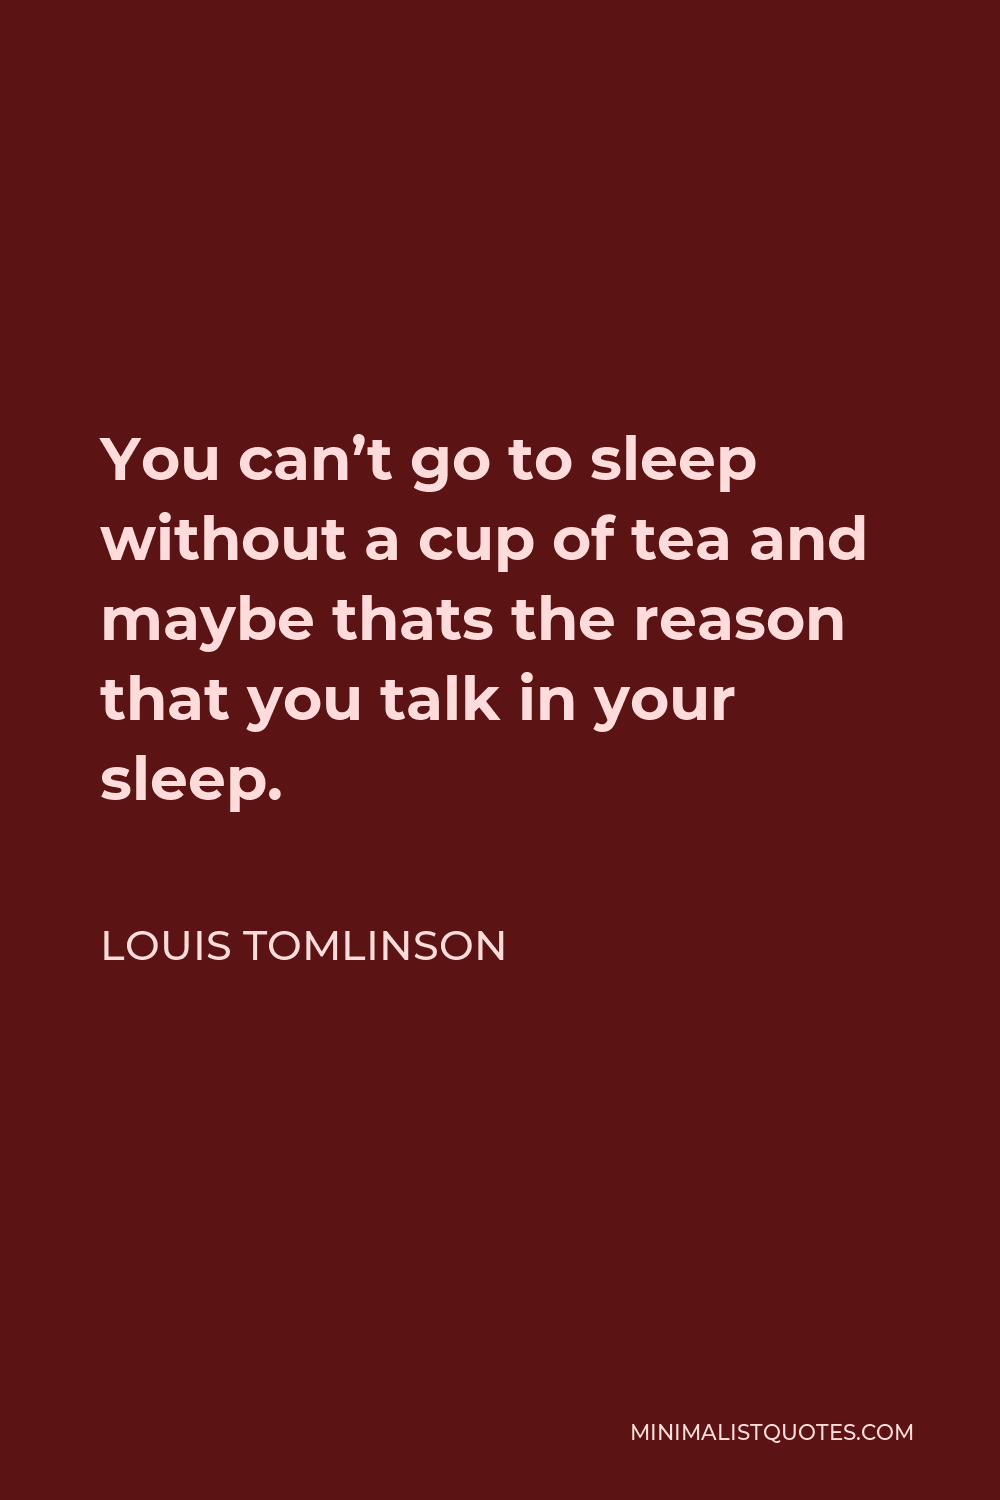 Louis Tomlinson Quote - You can’t go to sleep without a cup of tea and maybe thats the reason that you talk in your sleep.